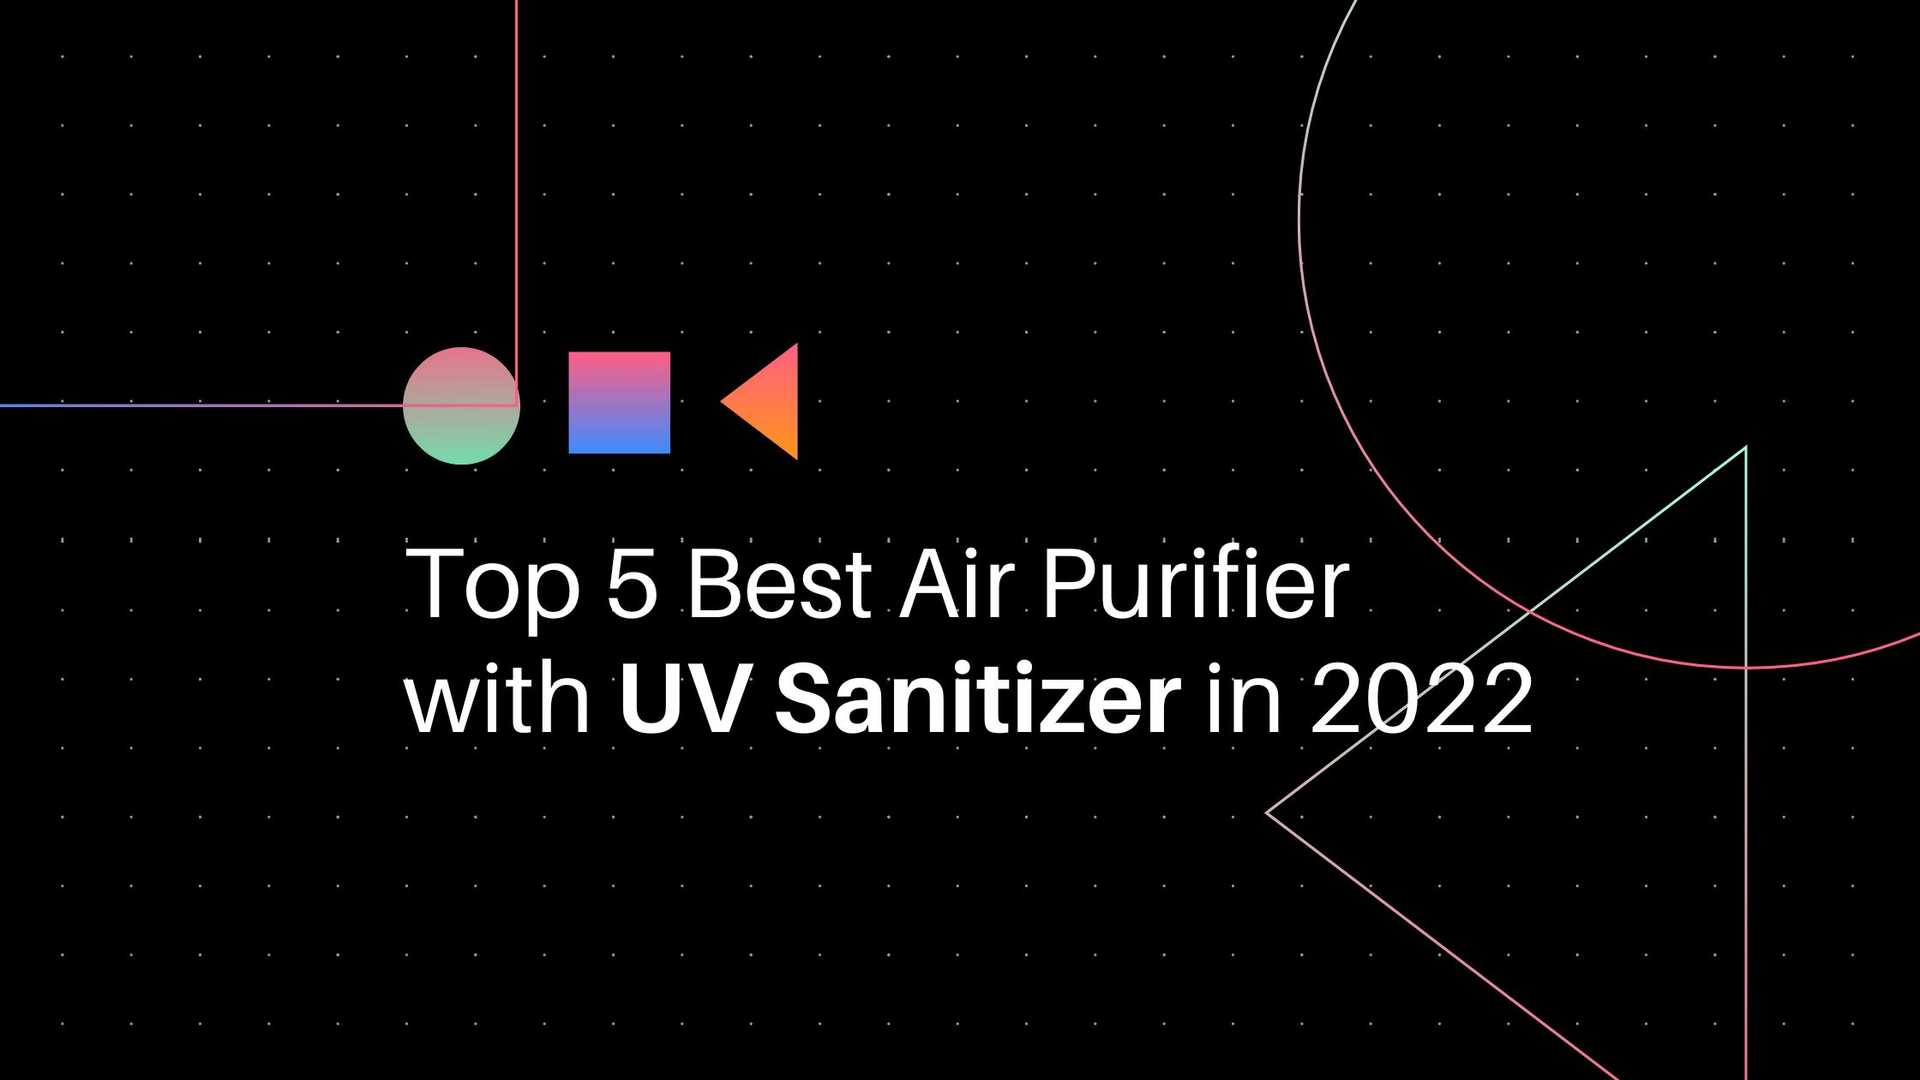 Top 5 Best Air Purifier with UV Sanitizer in 2022